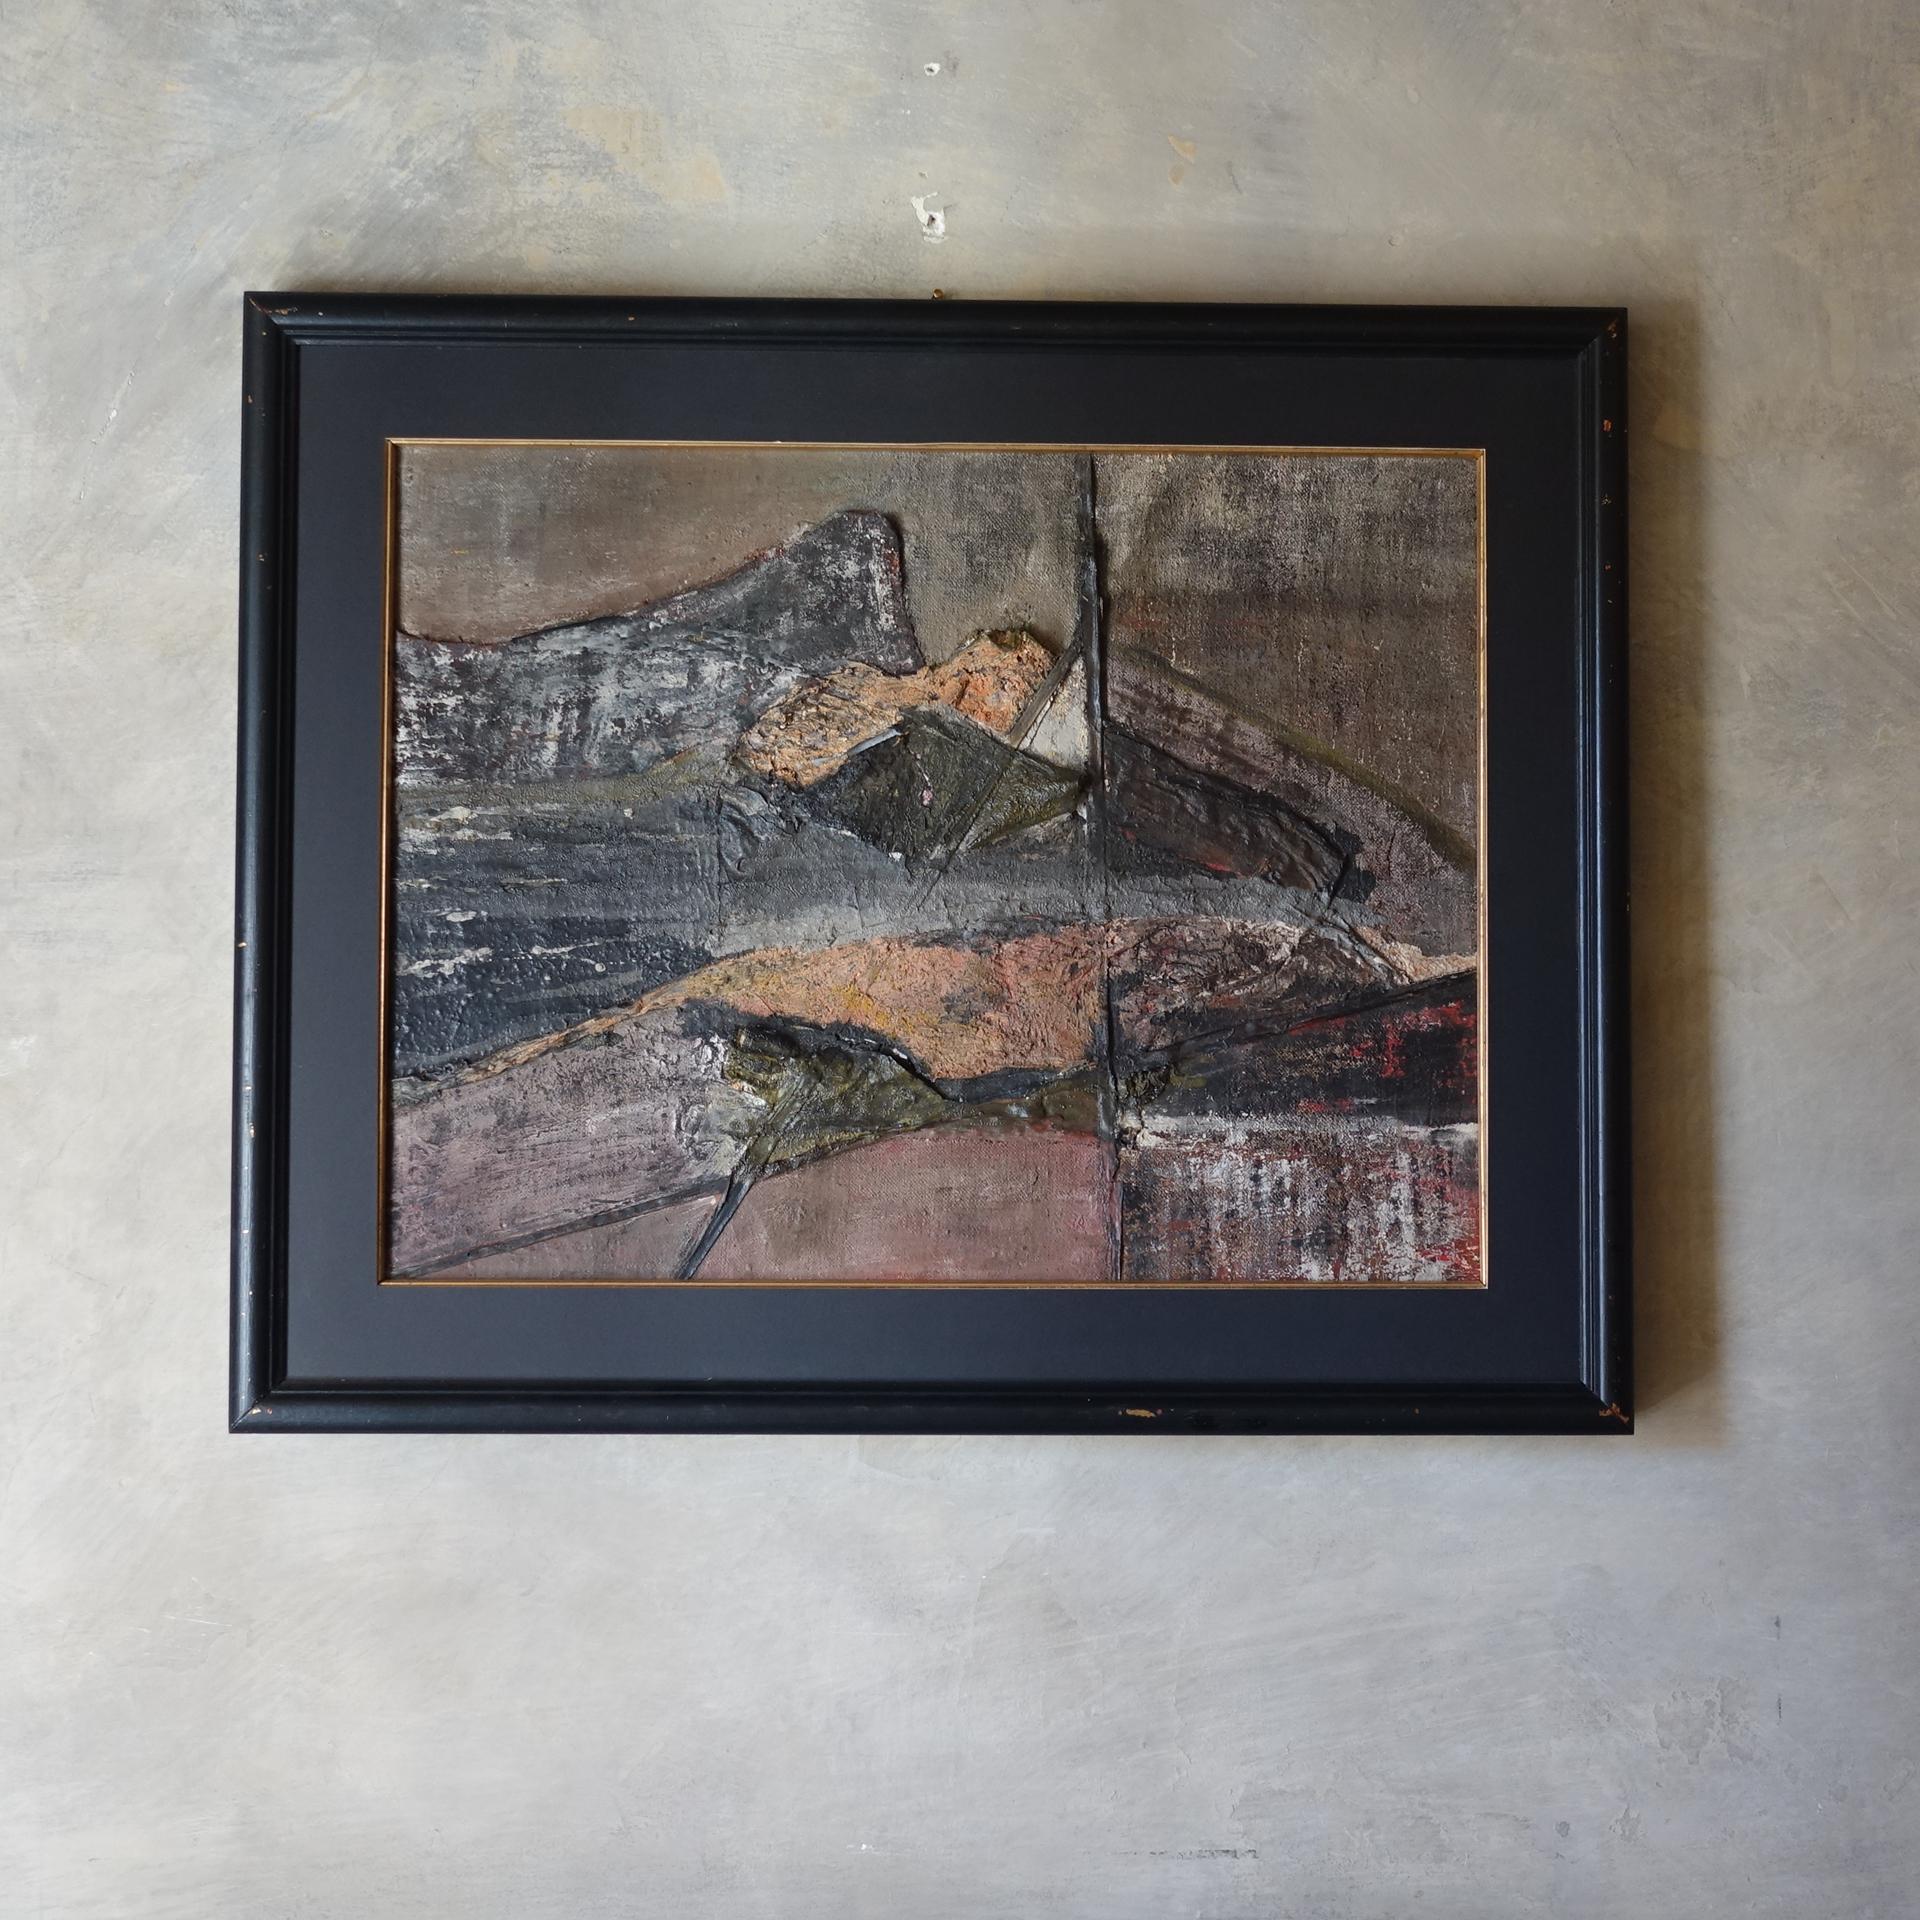 Abstract materic mixed media painting, overlapping of canvases, gypsum and acrylics, paper passpartout with gold leaf profile and black frame, italy 1960s circa.